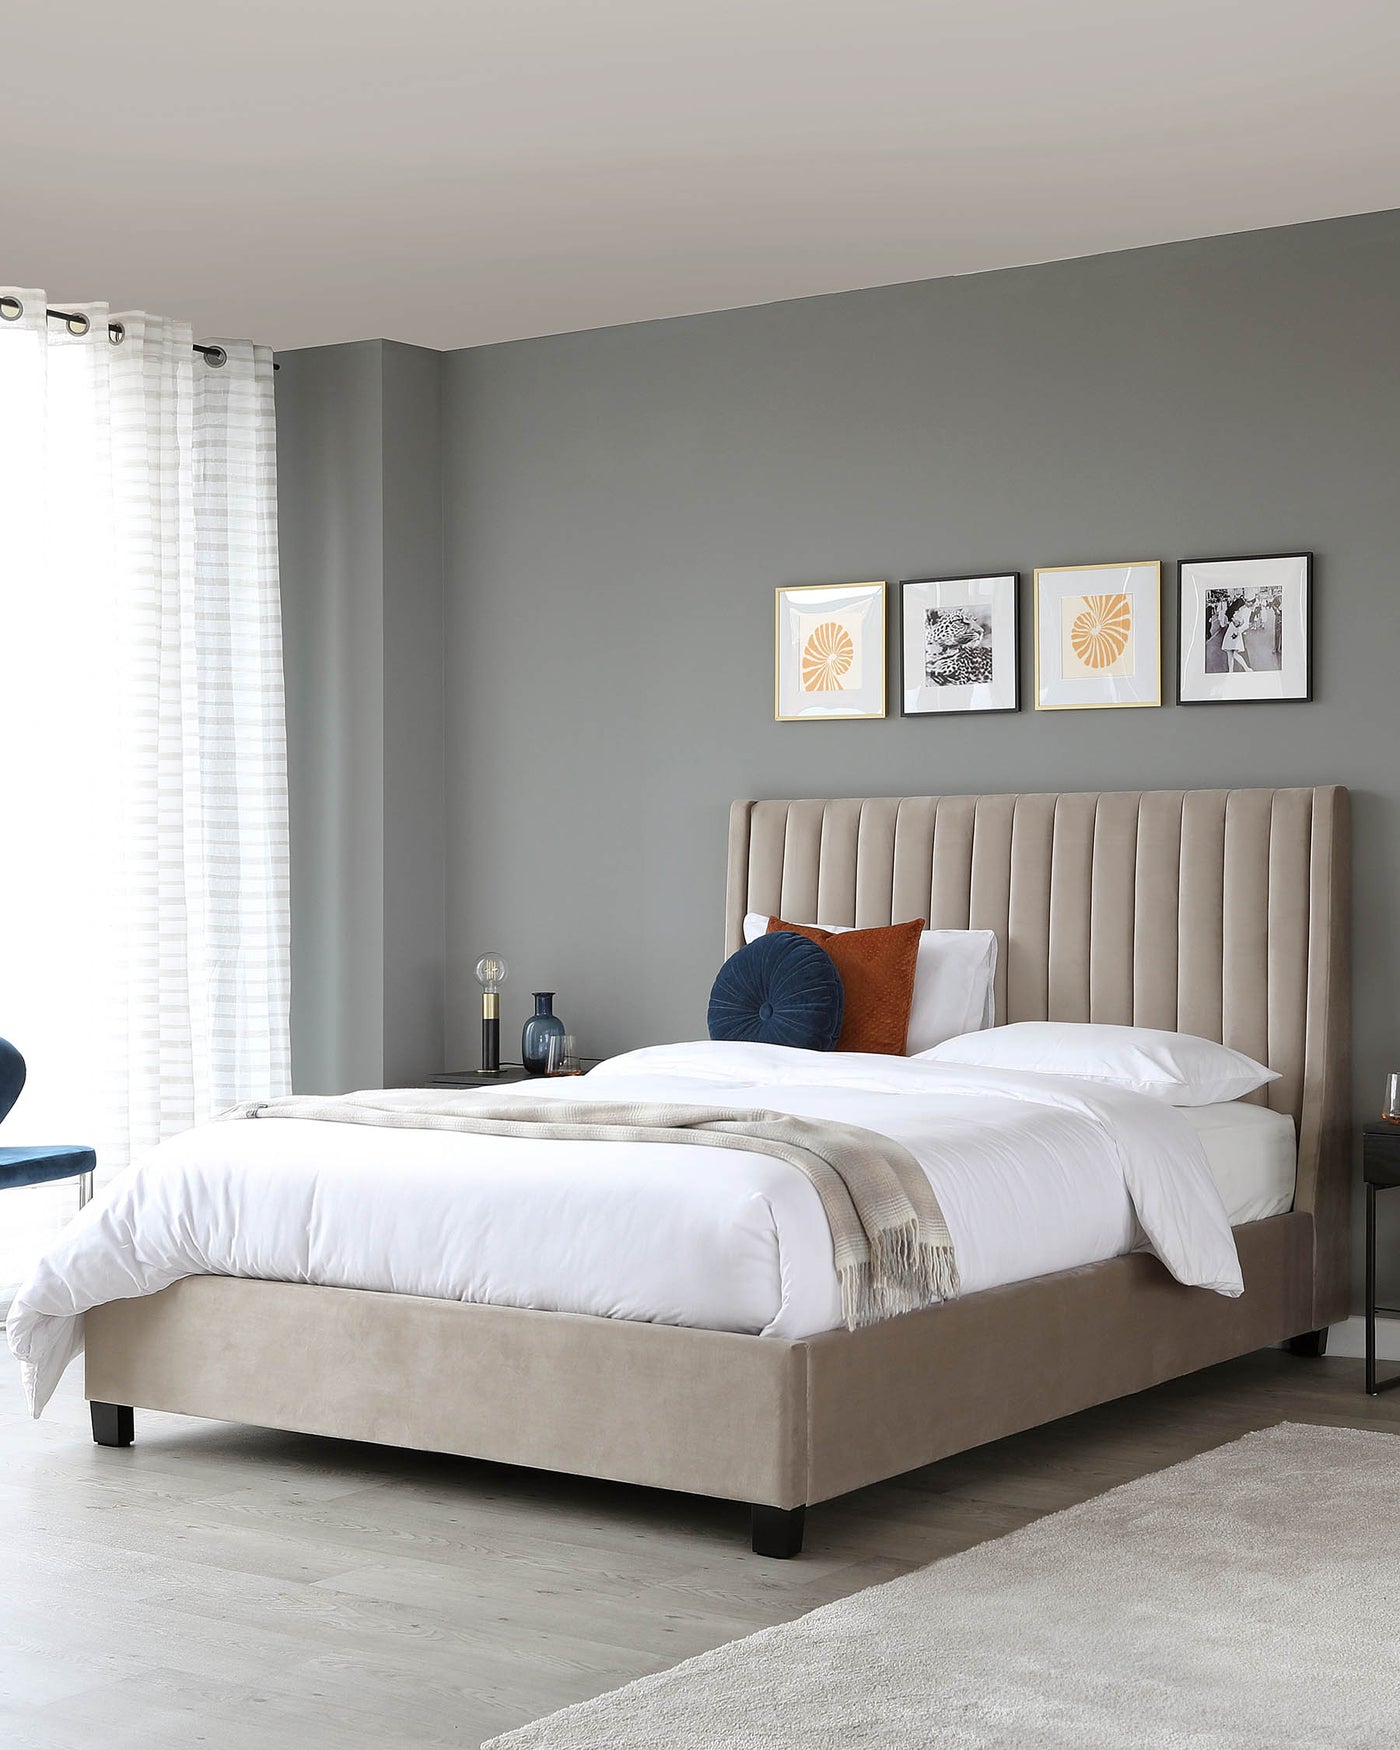 Elegant modern bedroom featuring a velvet upholstered king-sized platform bed with a high headboard displaying vertical channel tufting. The bed is layered with crisp white bedding, a beige throw, and assorted decorative pillows. To the side, a small nightstand with a contemporary table lamp is visible. No other furniture is prominently displayed.